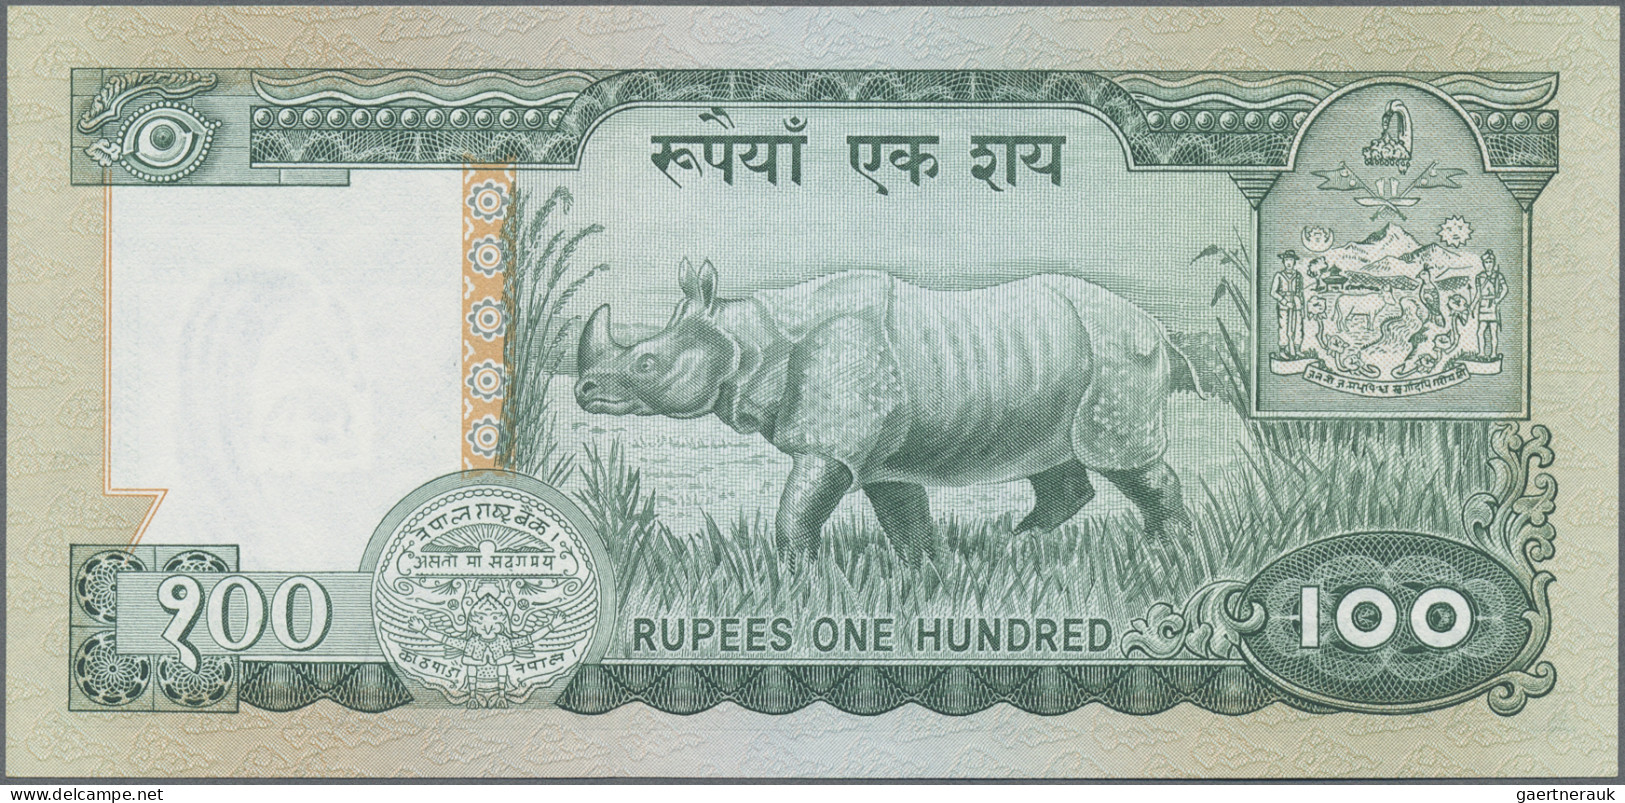 Nepal: Nepal Rastra Bank, lot with 1, 5, 10, 50 and 100 Rupees 1974, P.22-26 in